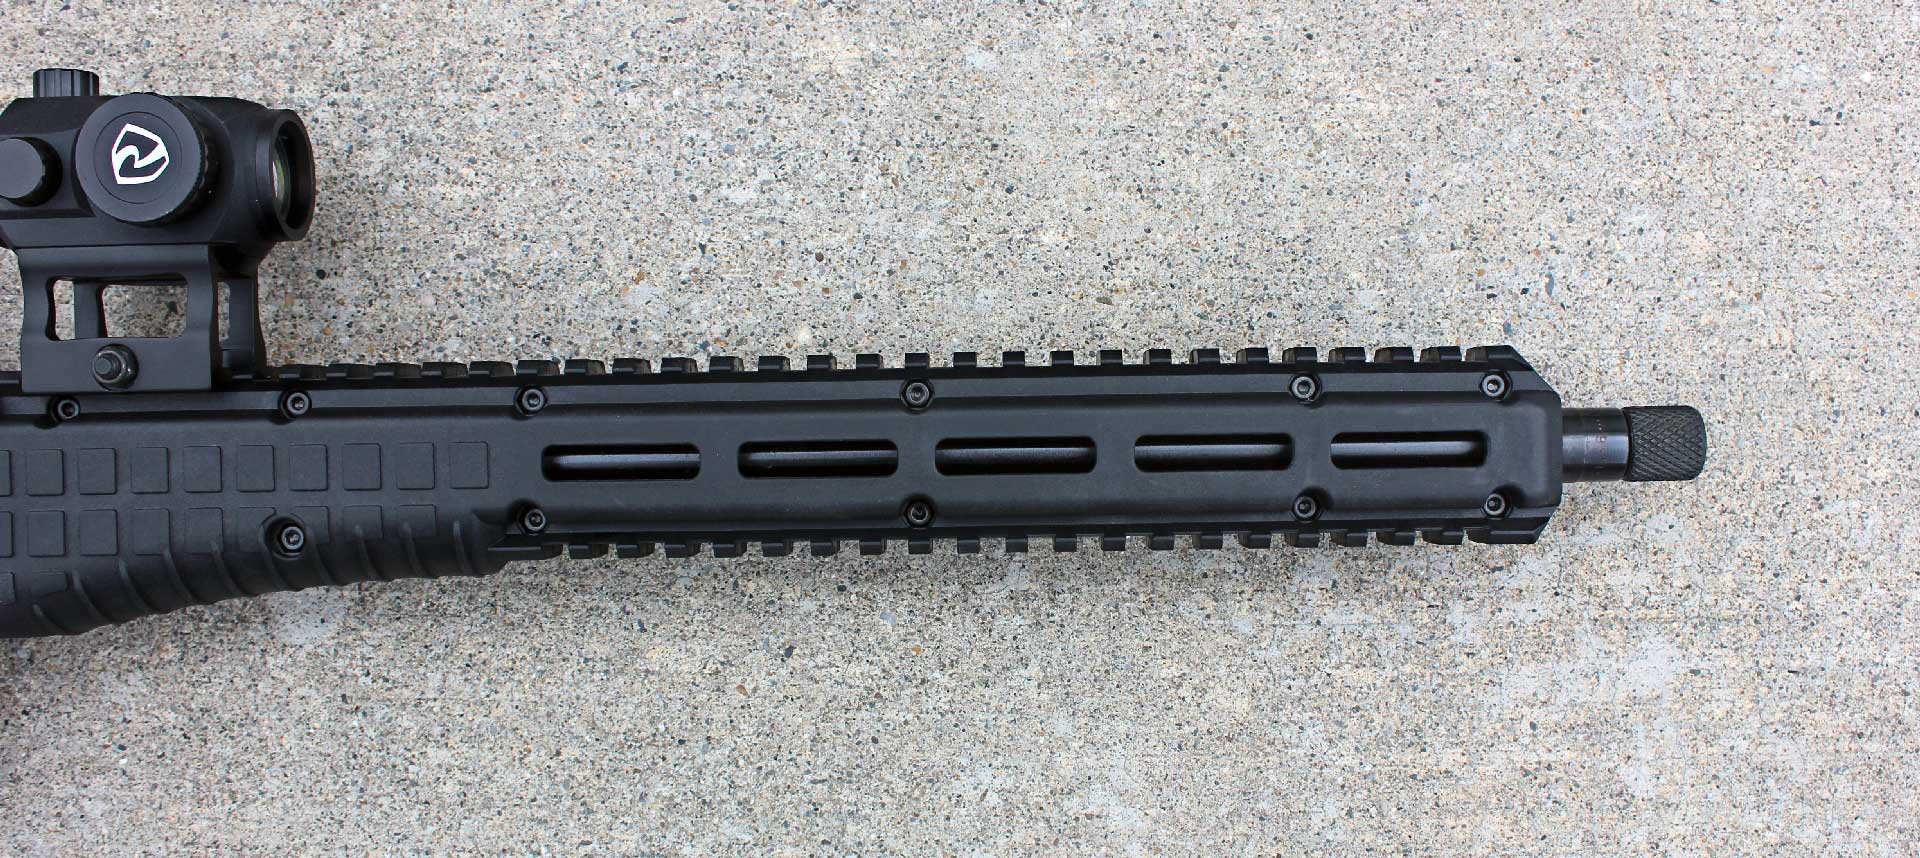 M-Lok slots shown on the right side of the KelTec SUB2000 GEN3 carbine's fore-end.